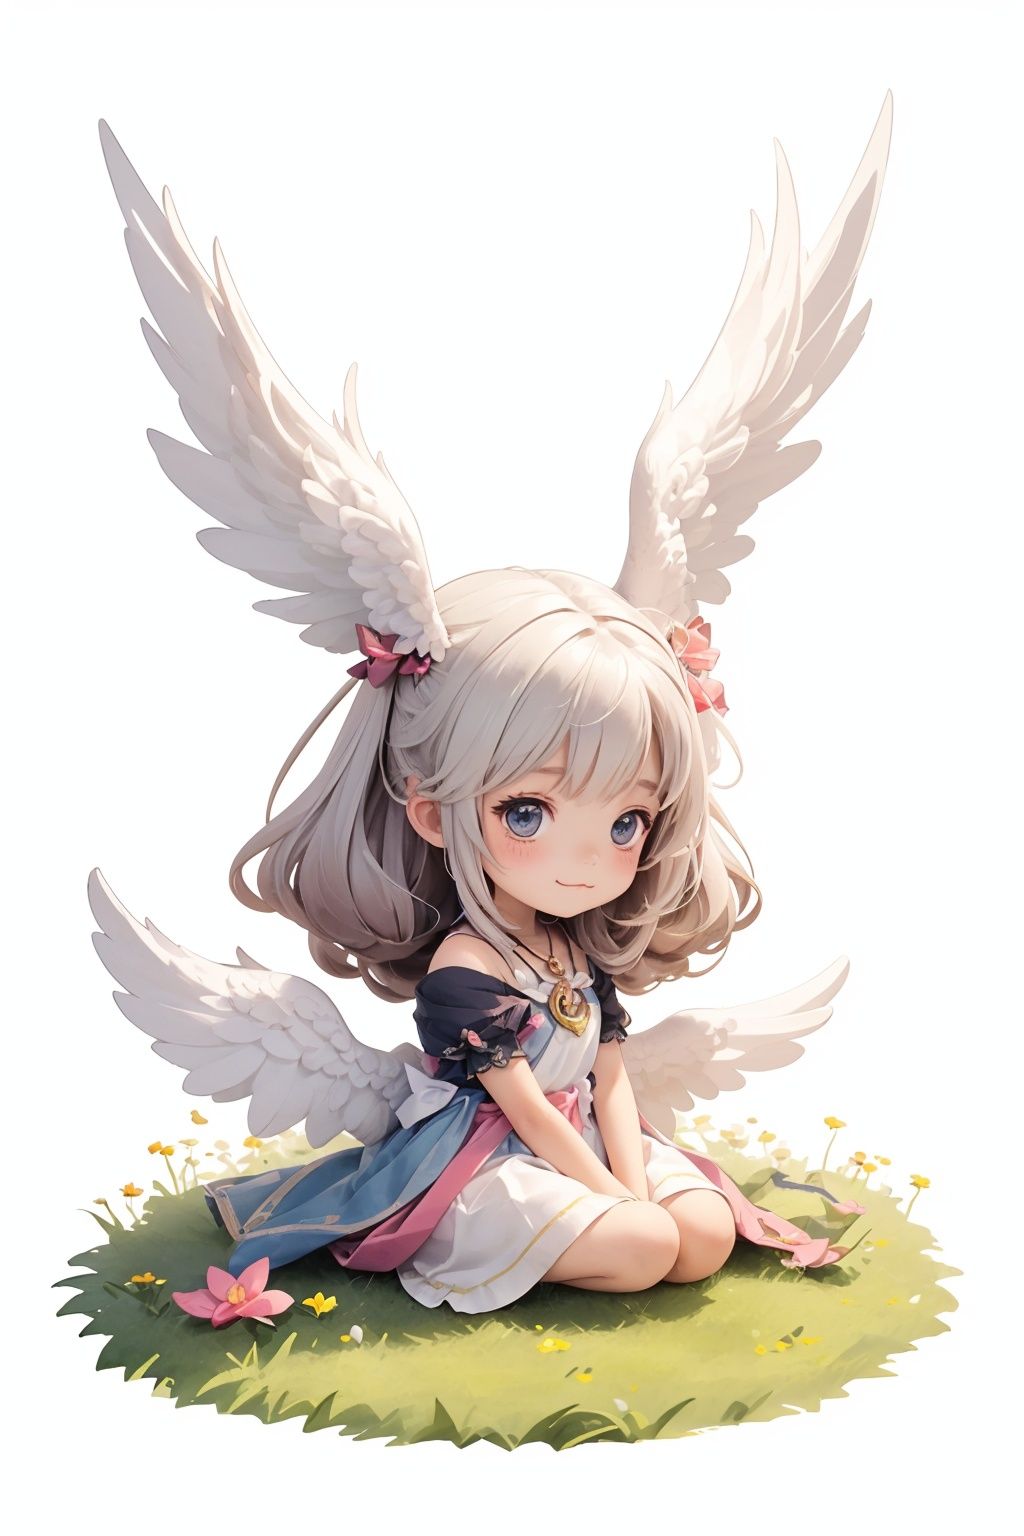 best quality,masterpiece,((simple background, blank background, pure white background)), (simple details),(minimalism:1.4), watercolor, chibi:2,den:2,(cute, sweet, fantasy),little angel girl:3,angel wings,long hairs,on grass,mini girl:1.2,